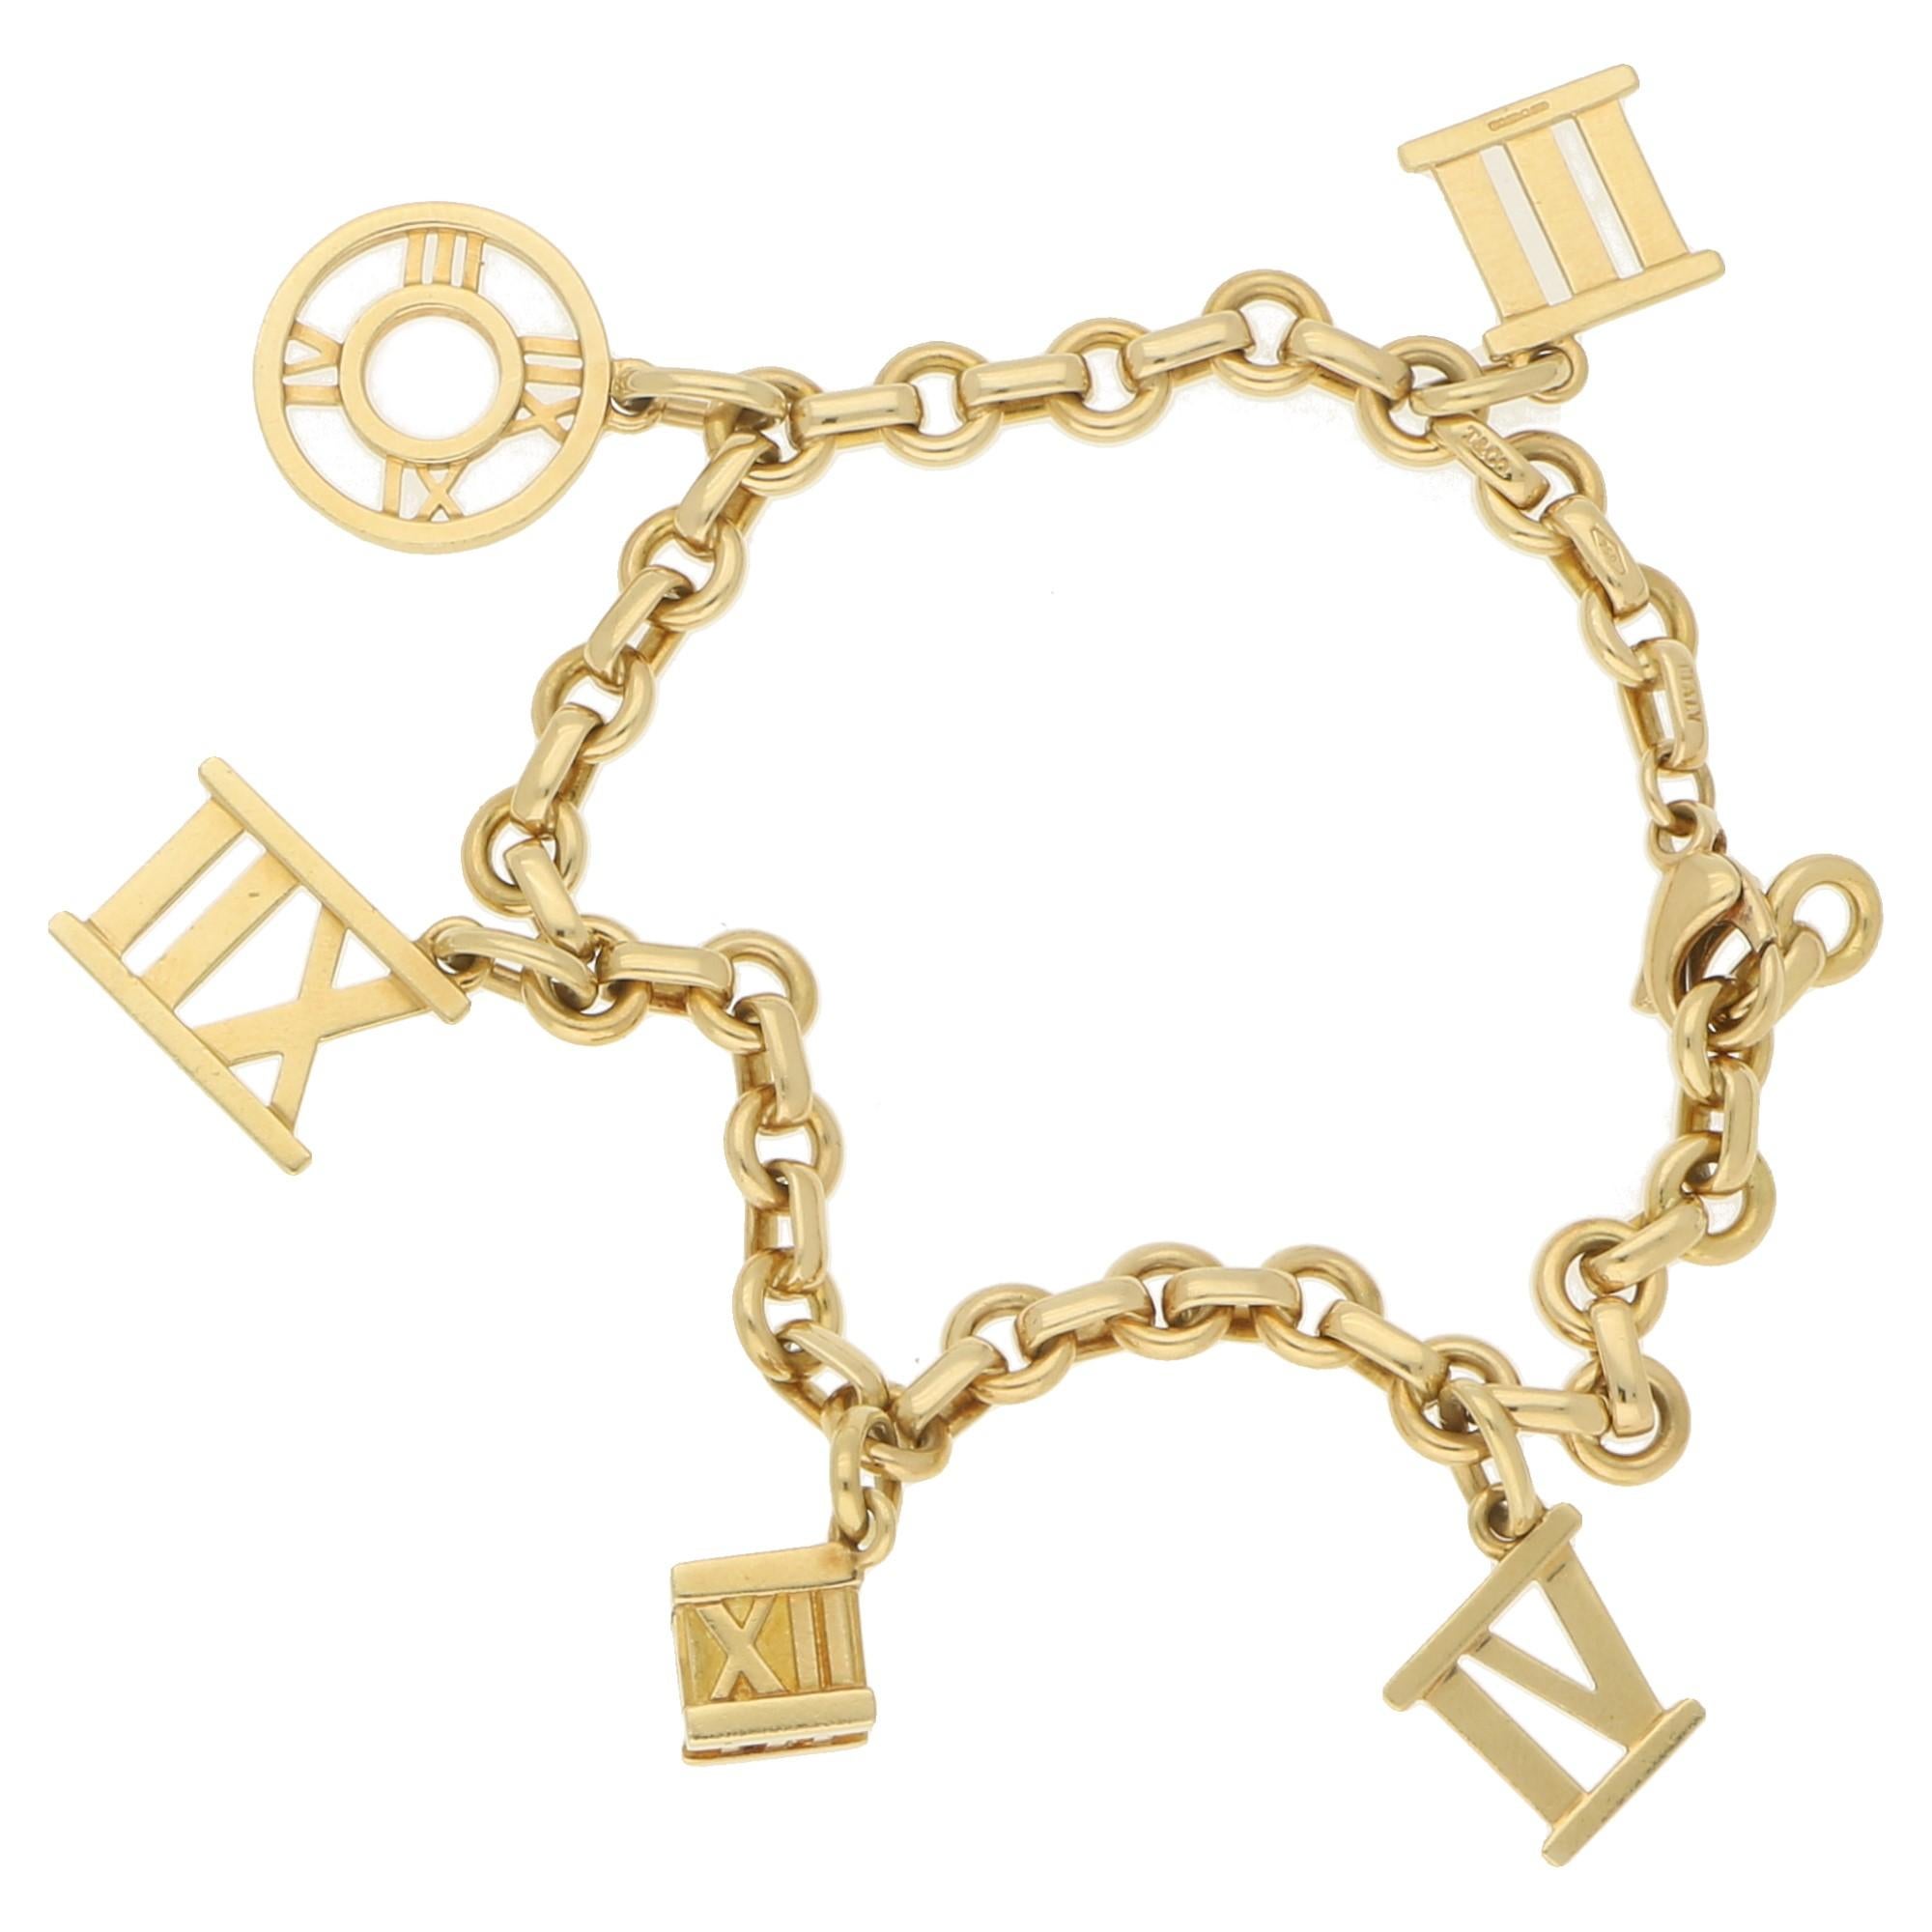 A fine vintage charm bracelet by Tiffany & Co. from their Atlas collection. It is well crafted from solid 18k yellow gold in a fine polished finish and carries five Roman numeral charms, also a cube charm and a round charm. The piece fastens with a